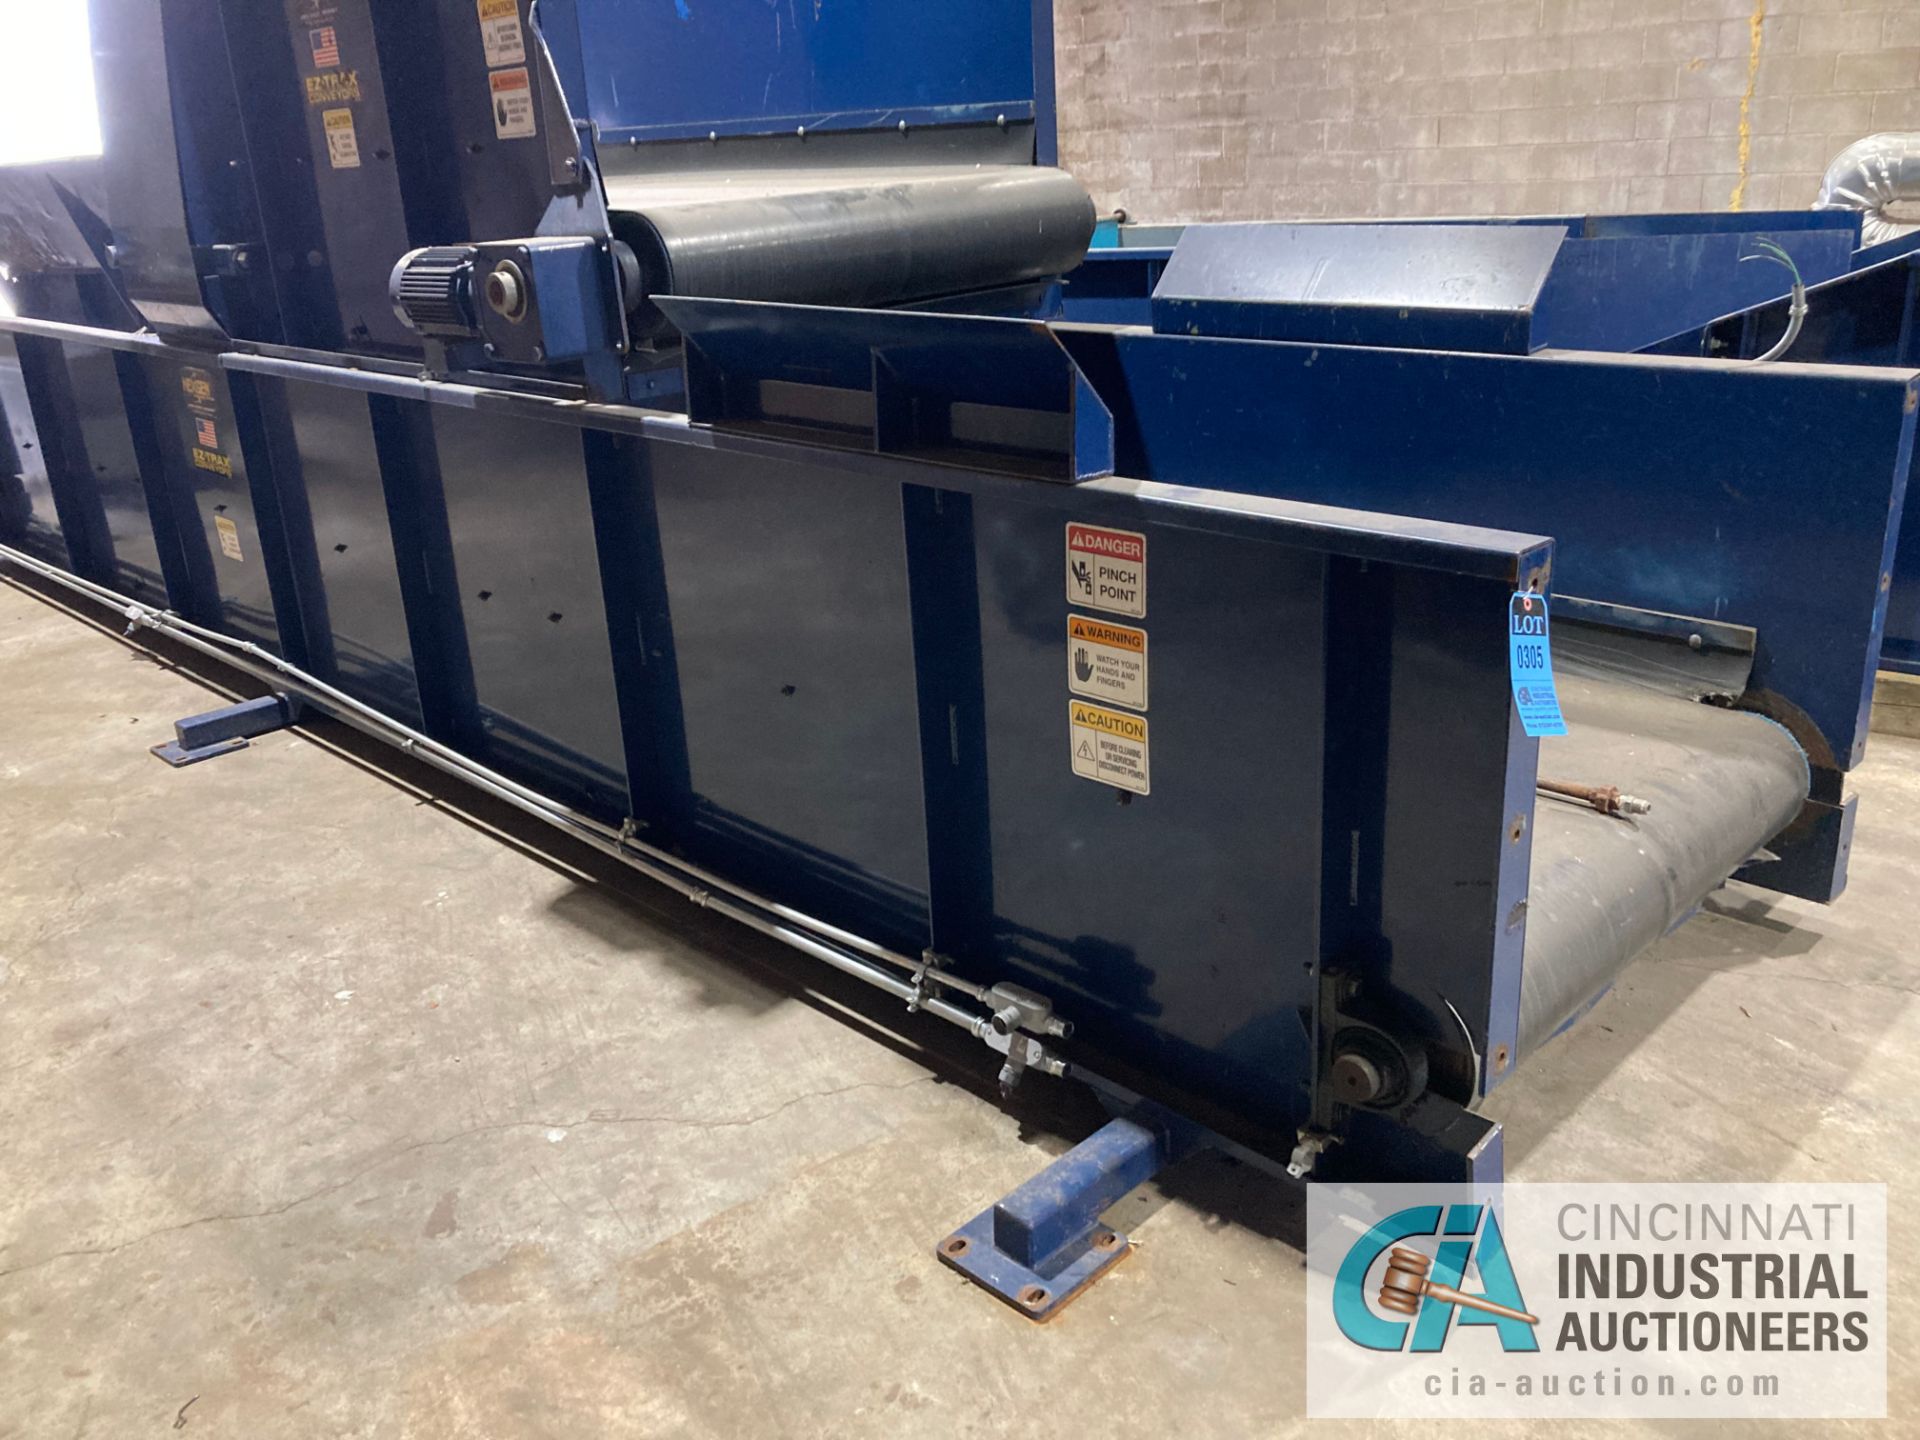 (LOT) 48" WIDE EZ-TRAX CONVEYOR, (3) SECTIONS WITH OVERALL LENGTH OF 80'